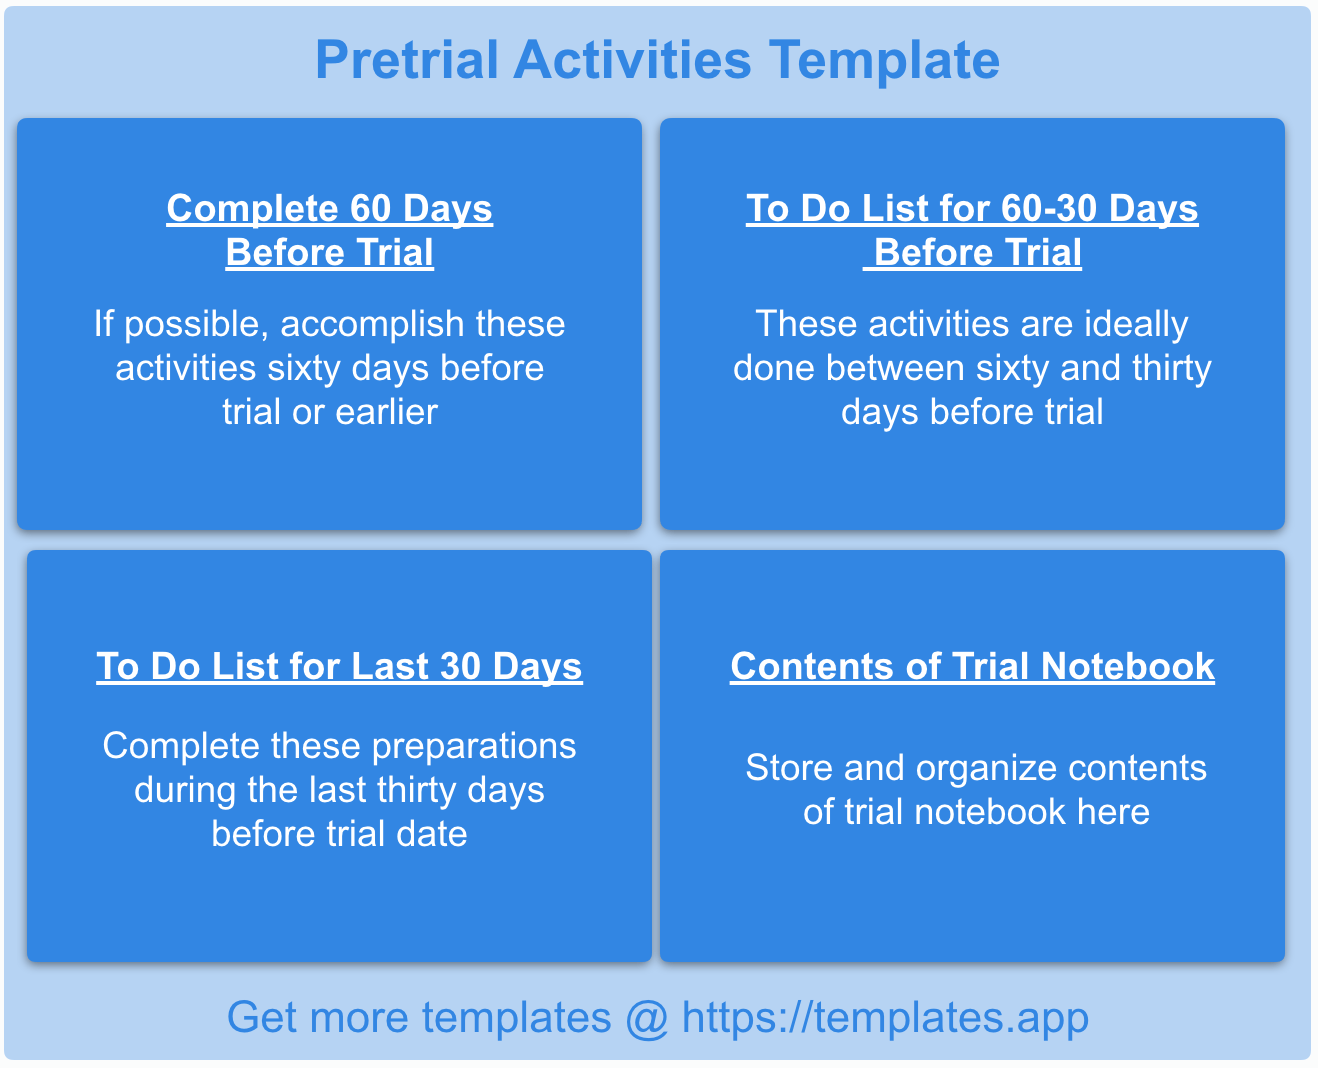 Legal Operations Management: Pretrial Activities by templates.app